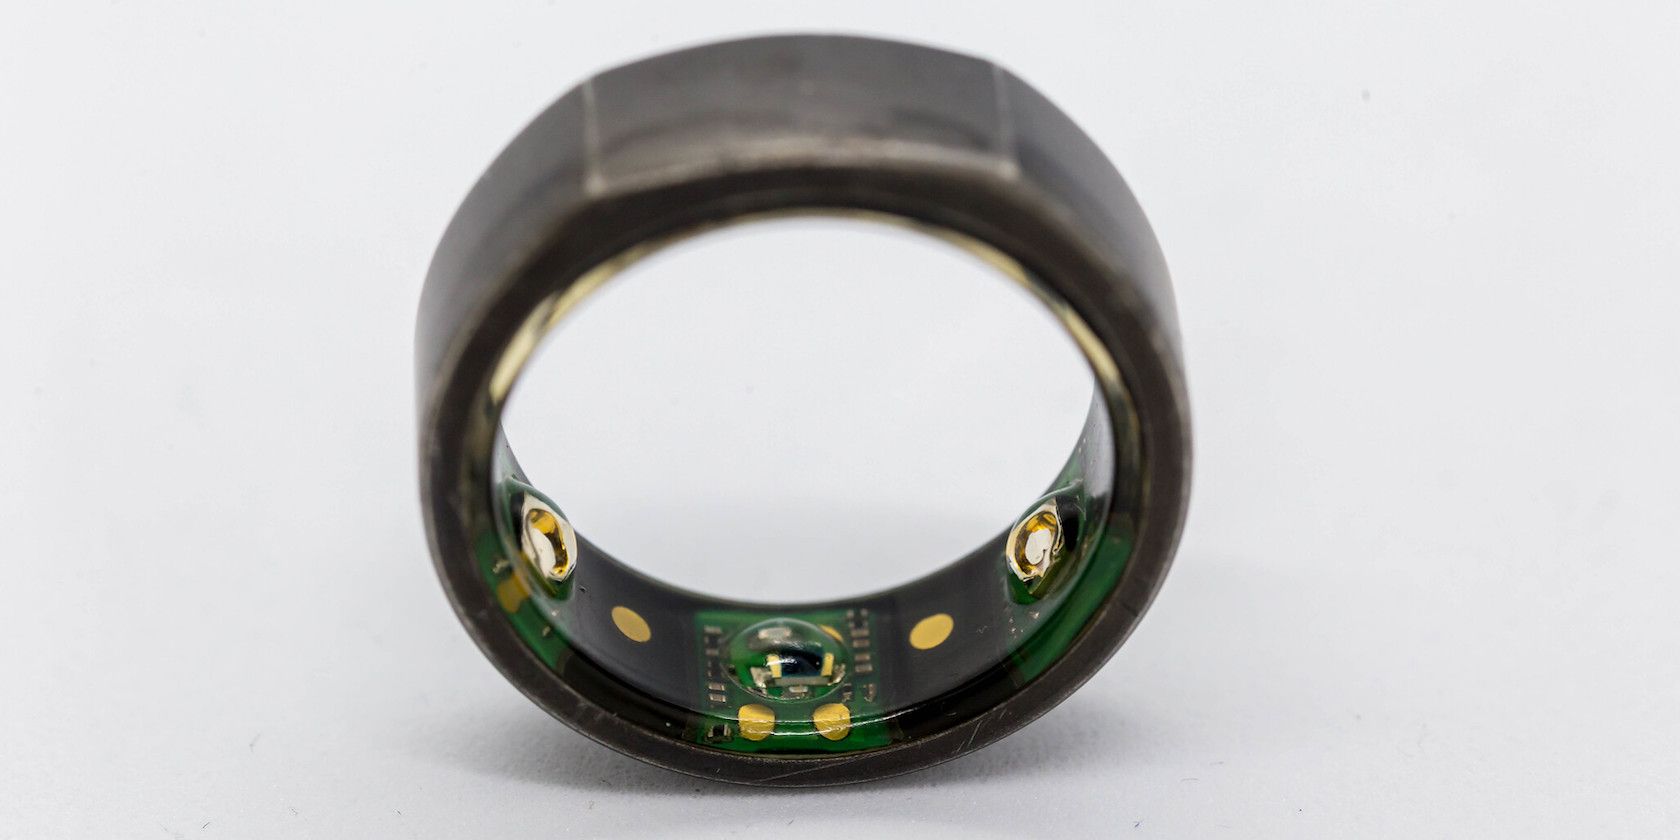 A close up shot of an Oura smart ring showing the electronic sensors inside